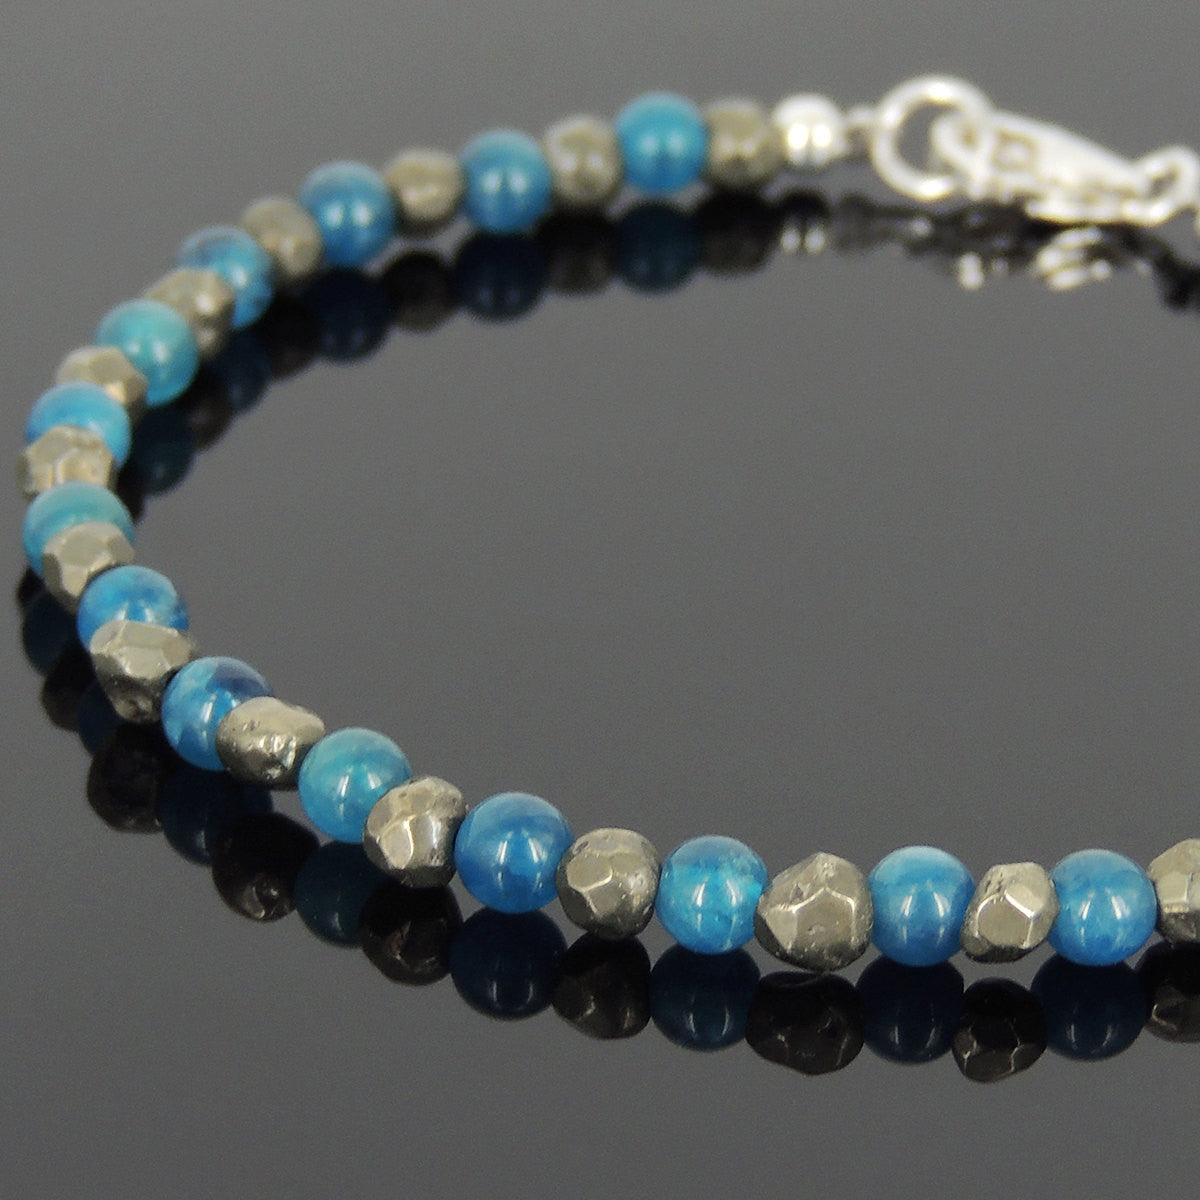 4mm Apatite & Faceted Gold Pyrite Healing Gemstone Bracelet with S925 Sterling Silver Beads & Clasp - Handmade by Gem & Silver BR601